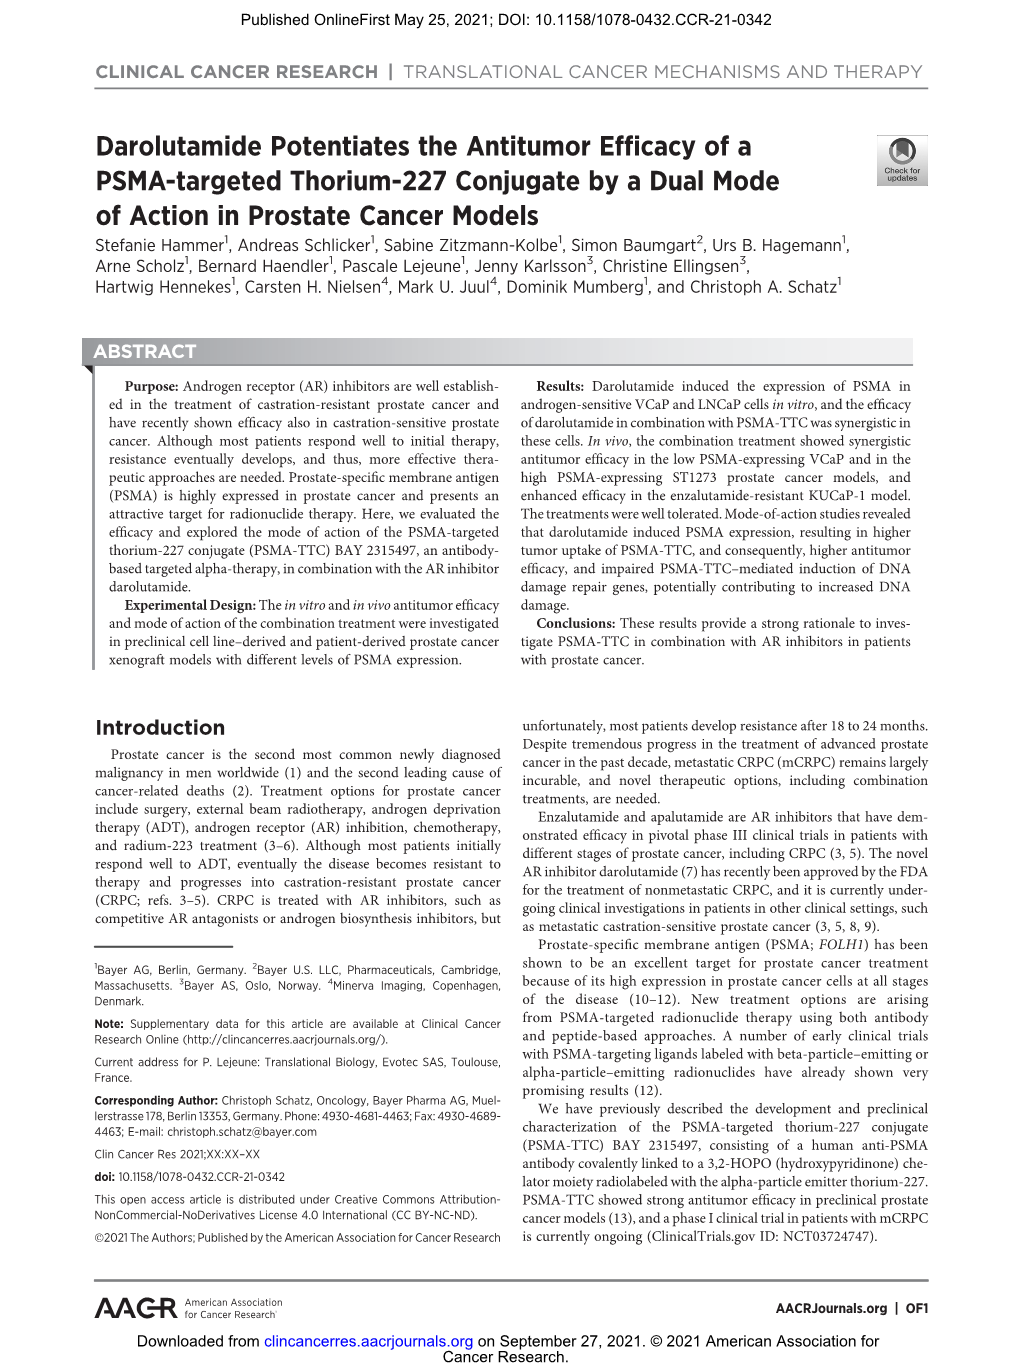 Darolutamide Potentiates the Antitumor Efficacy of a PSMA-Targeted Thorium-227 Conjugate by a Dual Mode of Action in Prostate Cancer Models